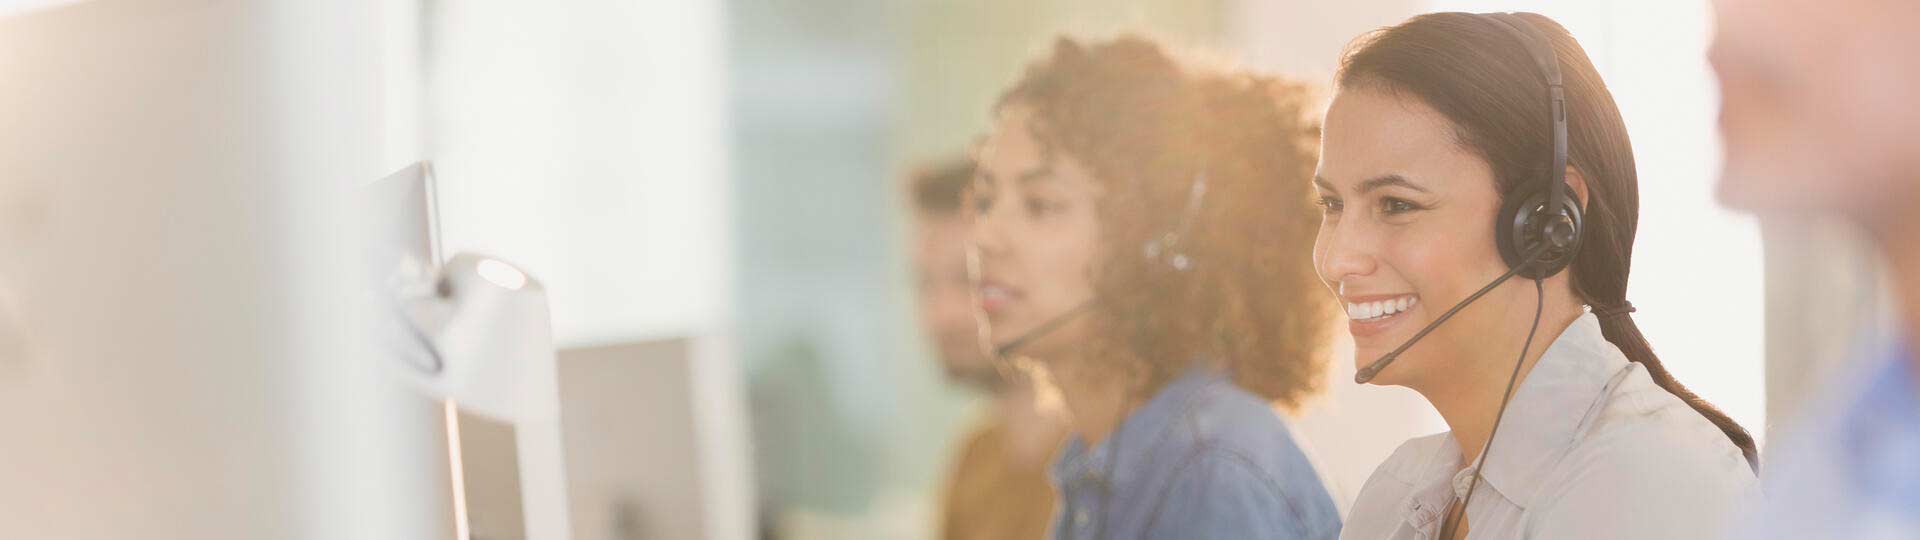 Girl using their headphones while working